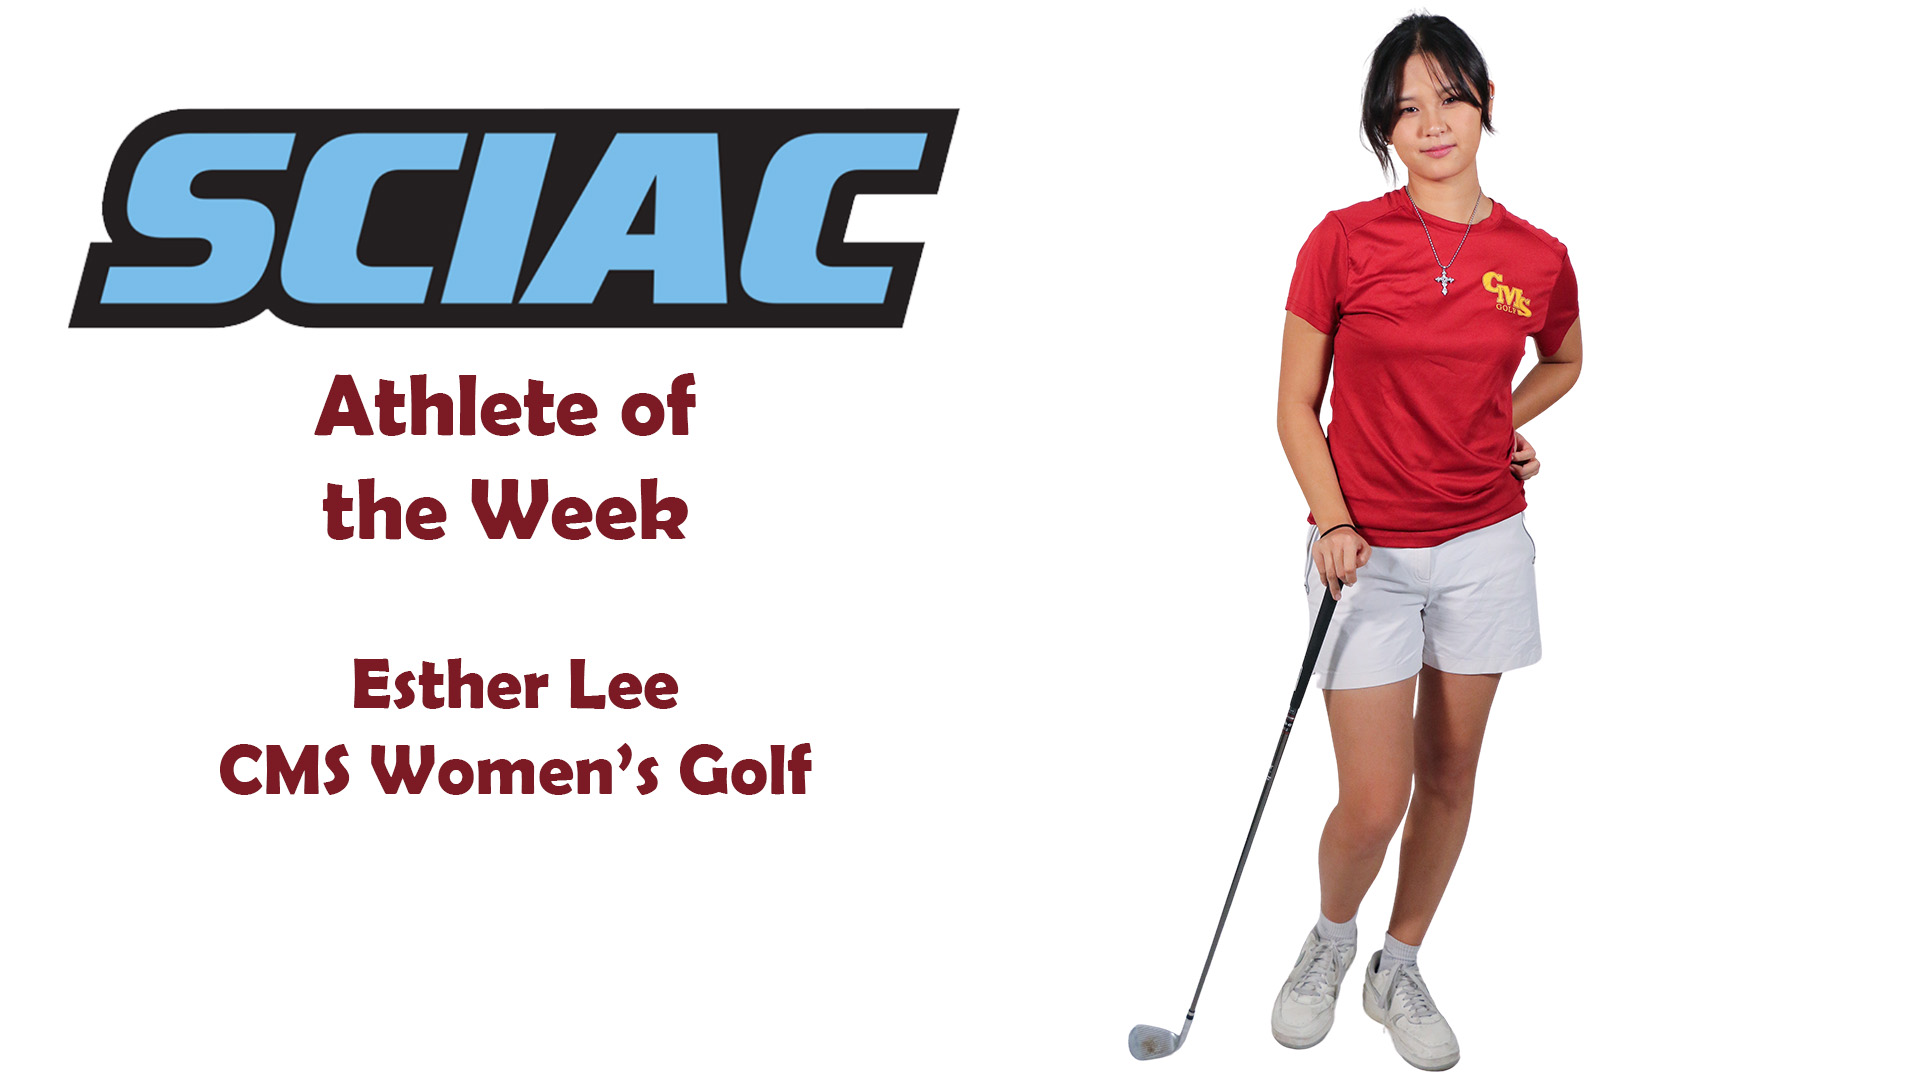 Esther Lee posed shot with SCIAC logo